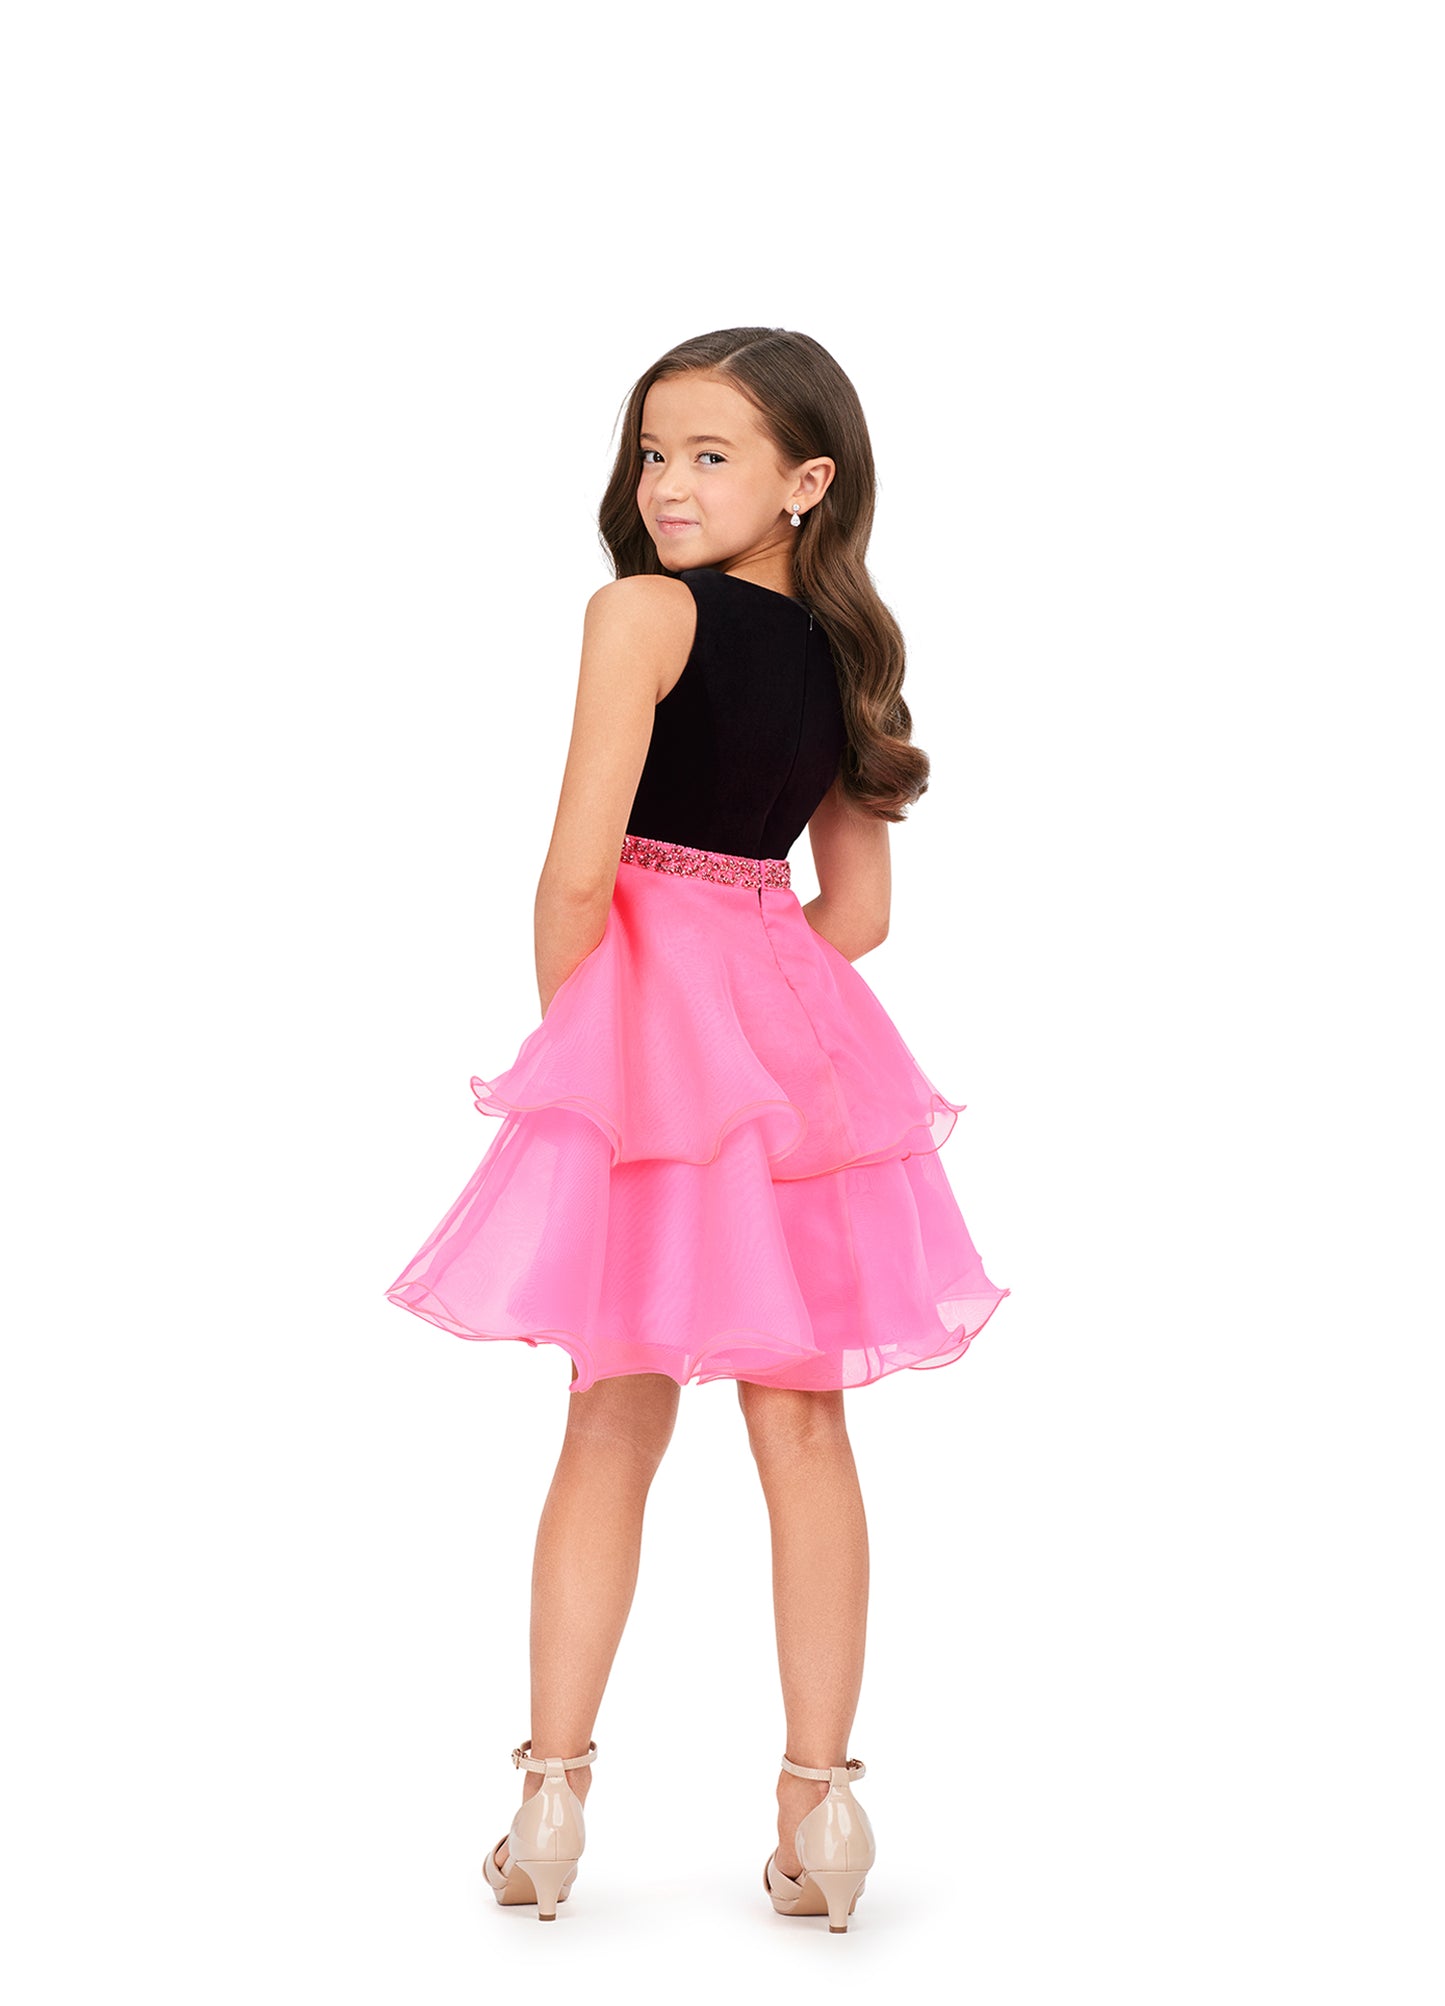 Ashley Lauren Kids 8216 Velvet Bustier And Organza Skirt Beaded Detail Crew Neckline Cocktail Dress. Elegant and adorable! This cocktail dress features a velvet bodice with a ruffled, layered organza skirt and a beaded waistband. We're in love!